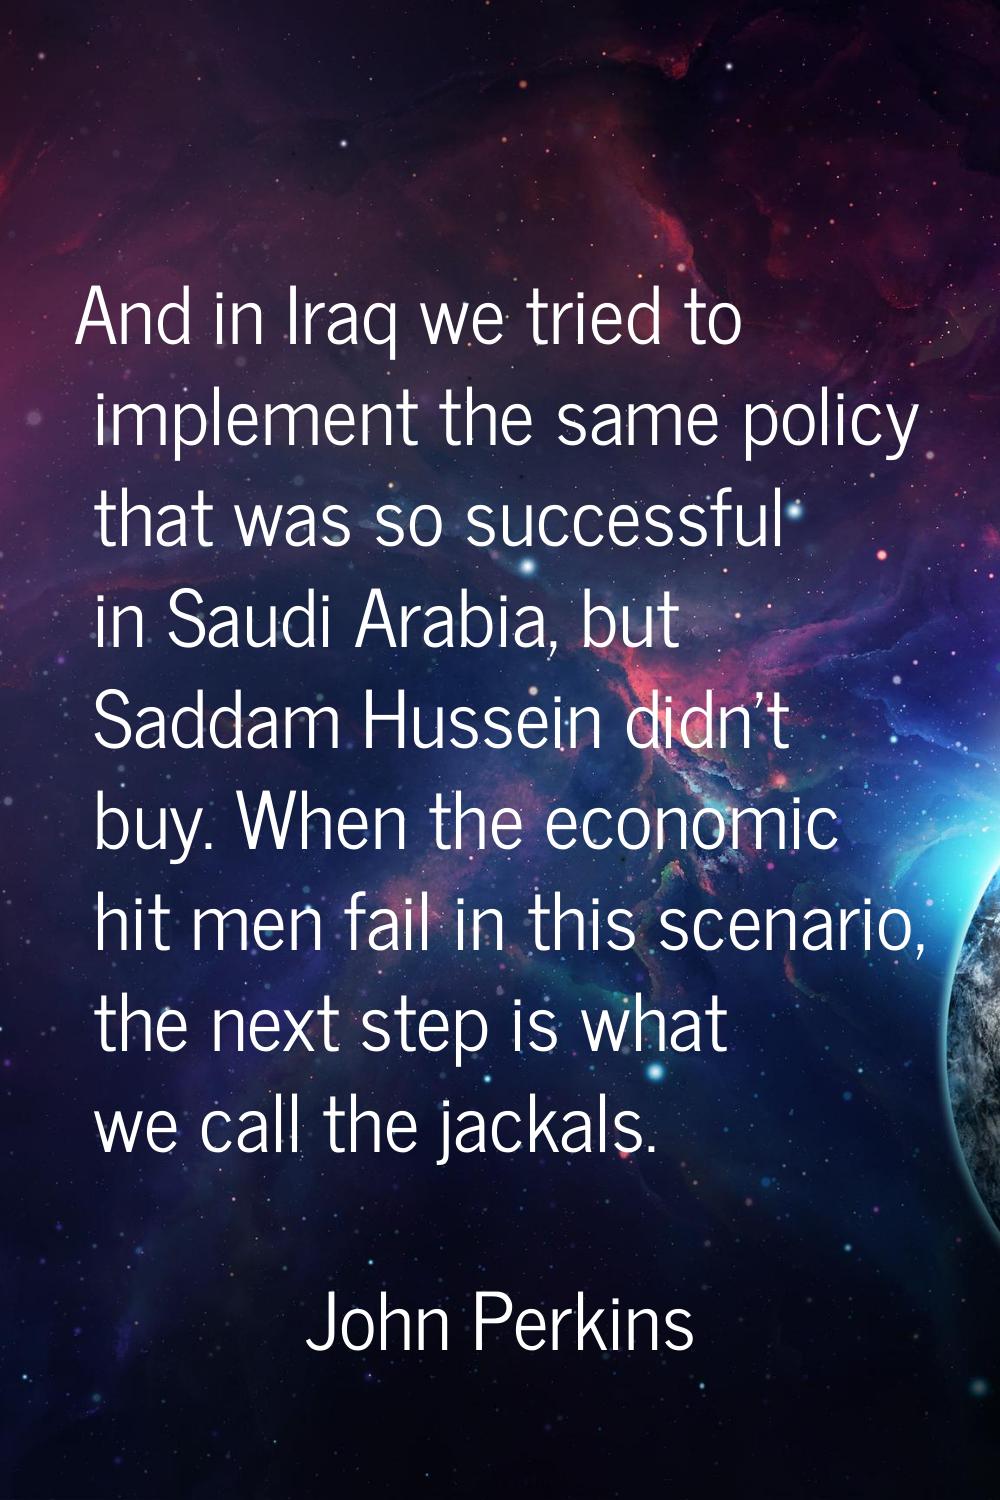 And in Iraq we tried to implement the same policy that was so successful in Saudi Arabia, but Sadda